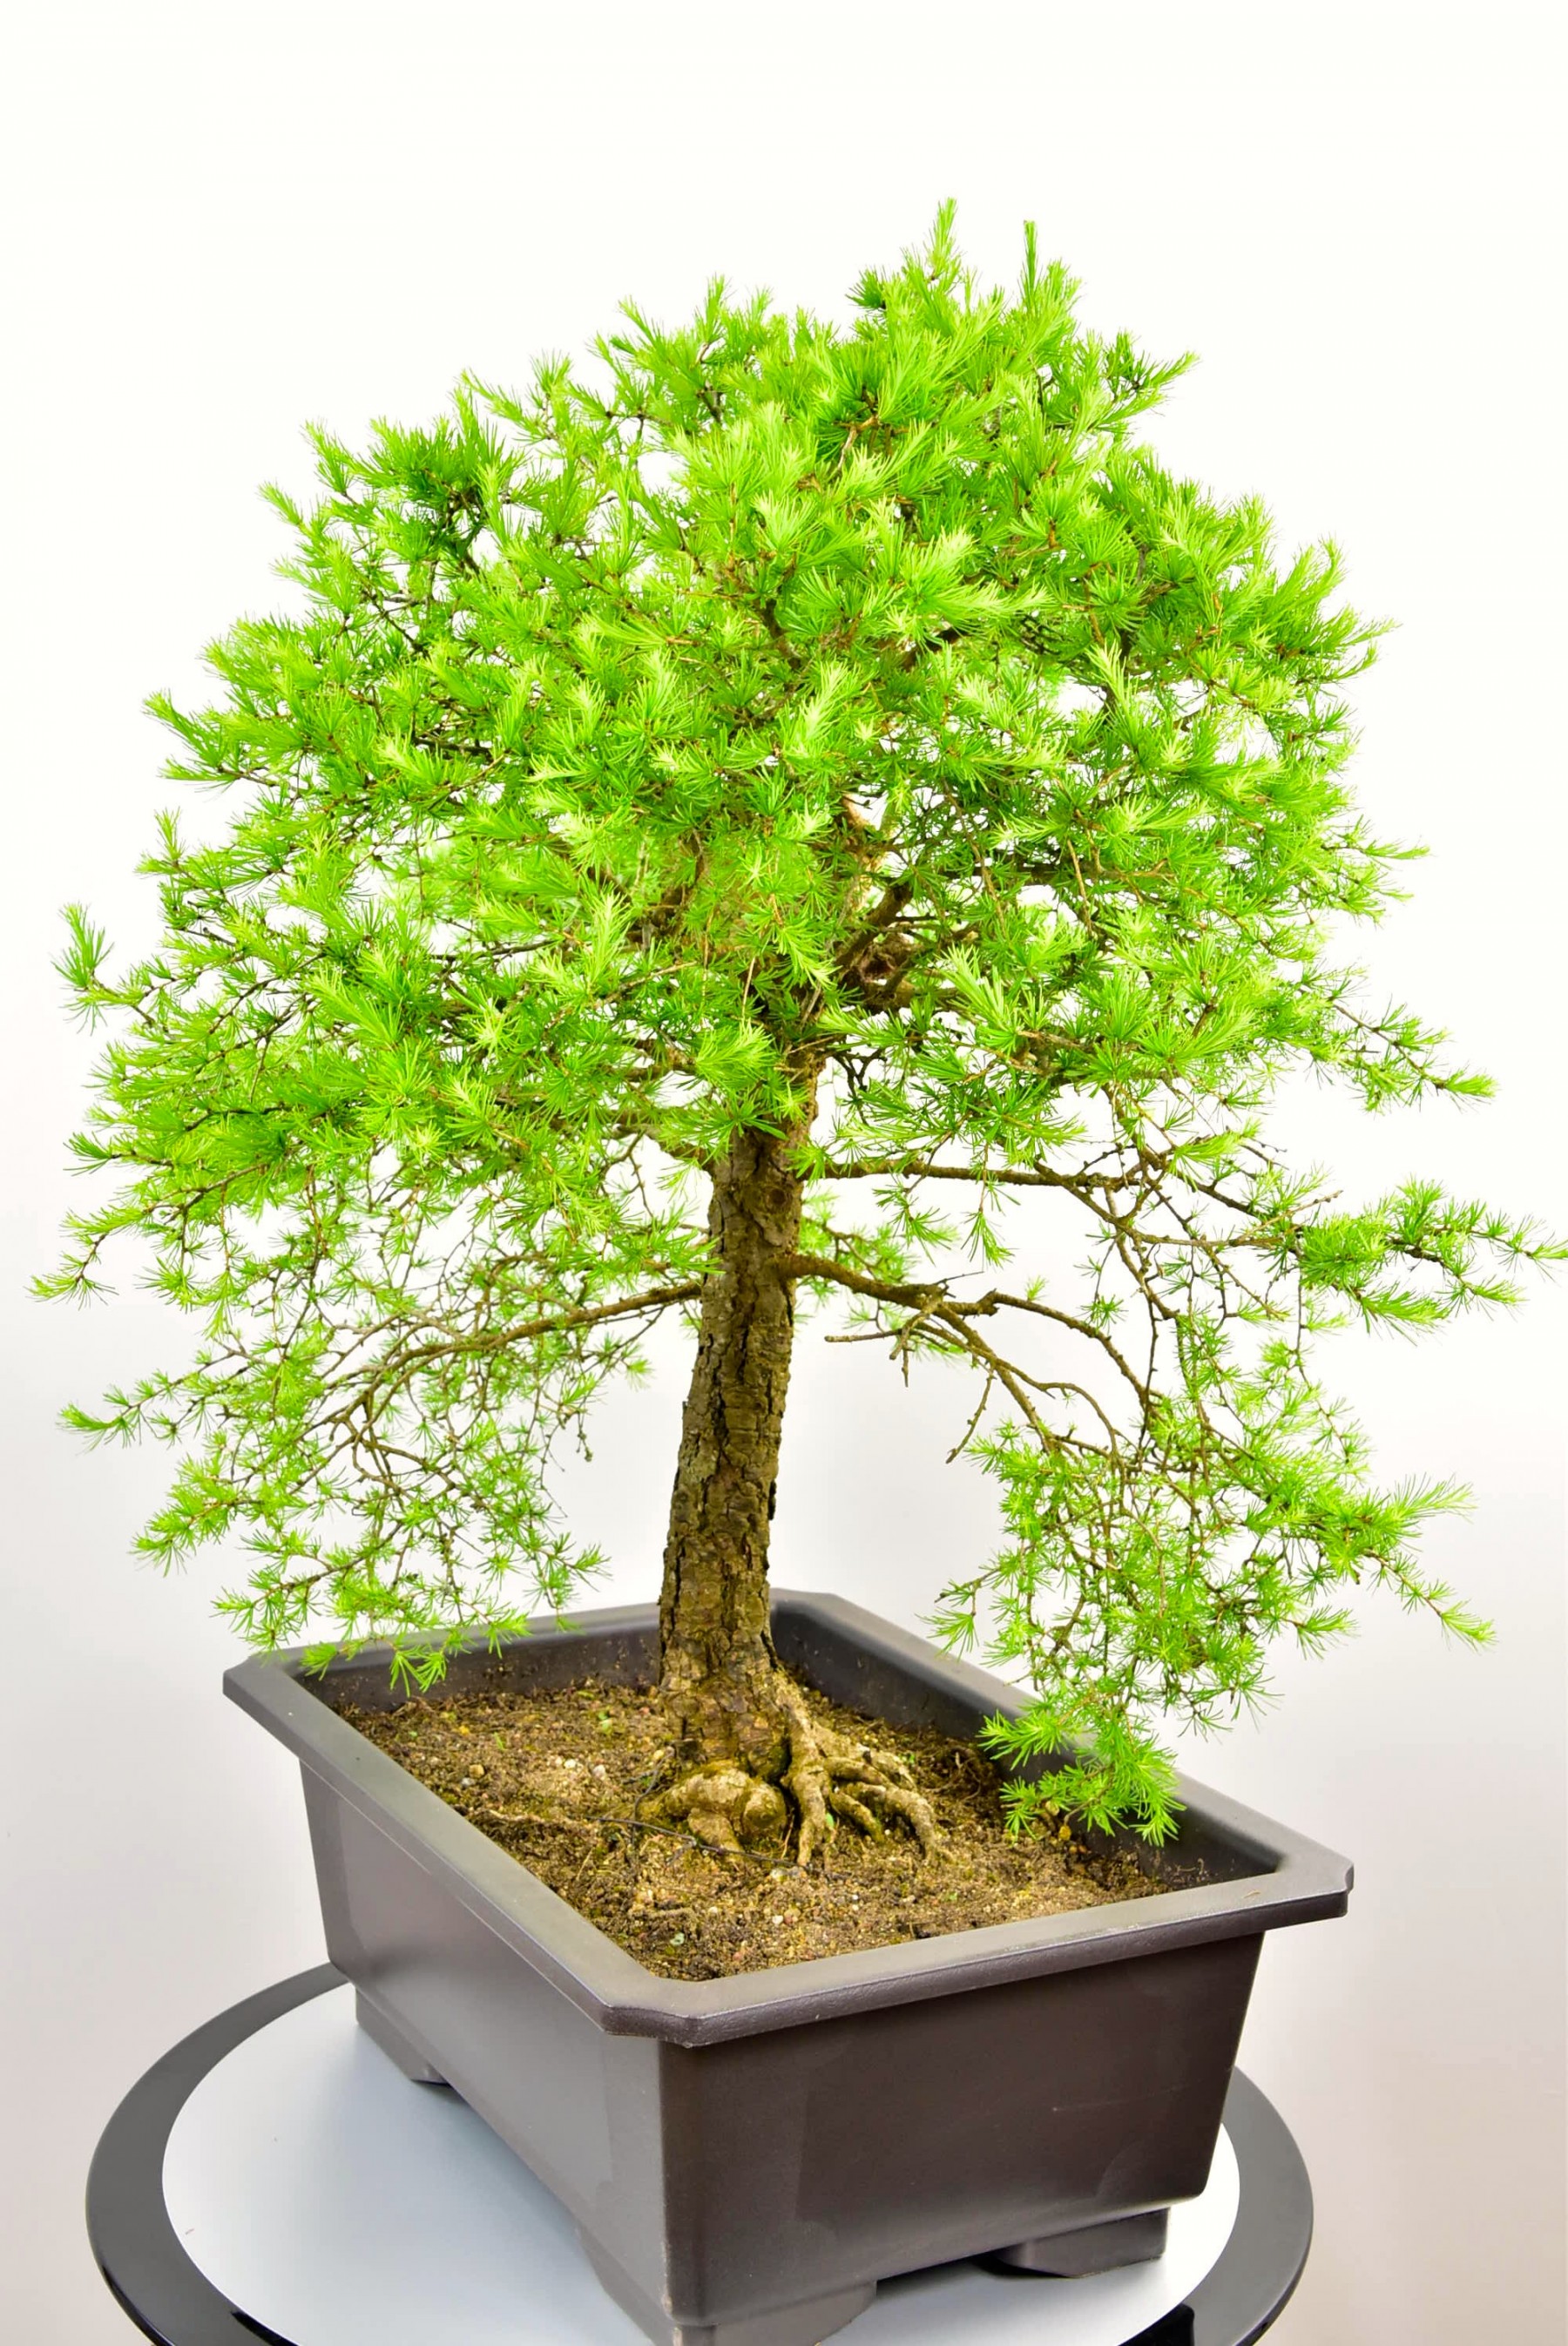 European Larch Bonsai for sale in the UK. Free delivery to most areas.